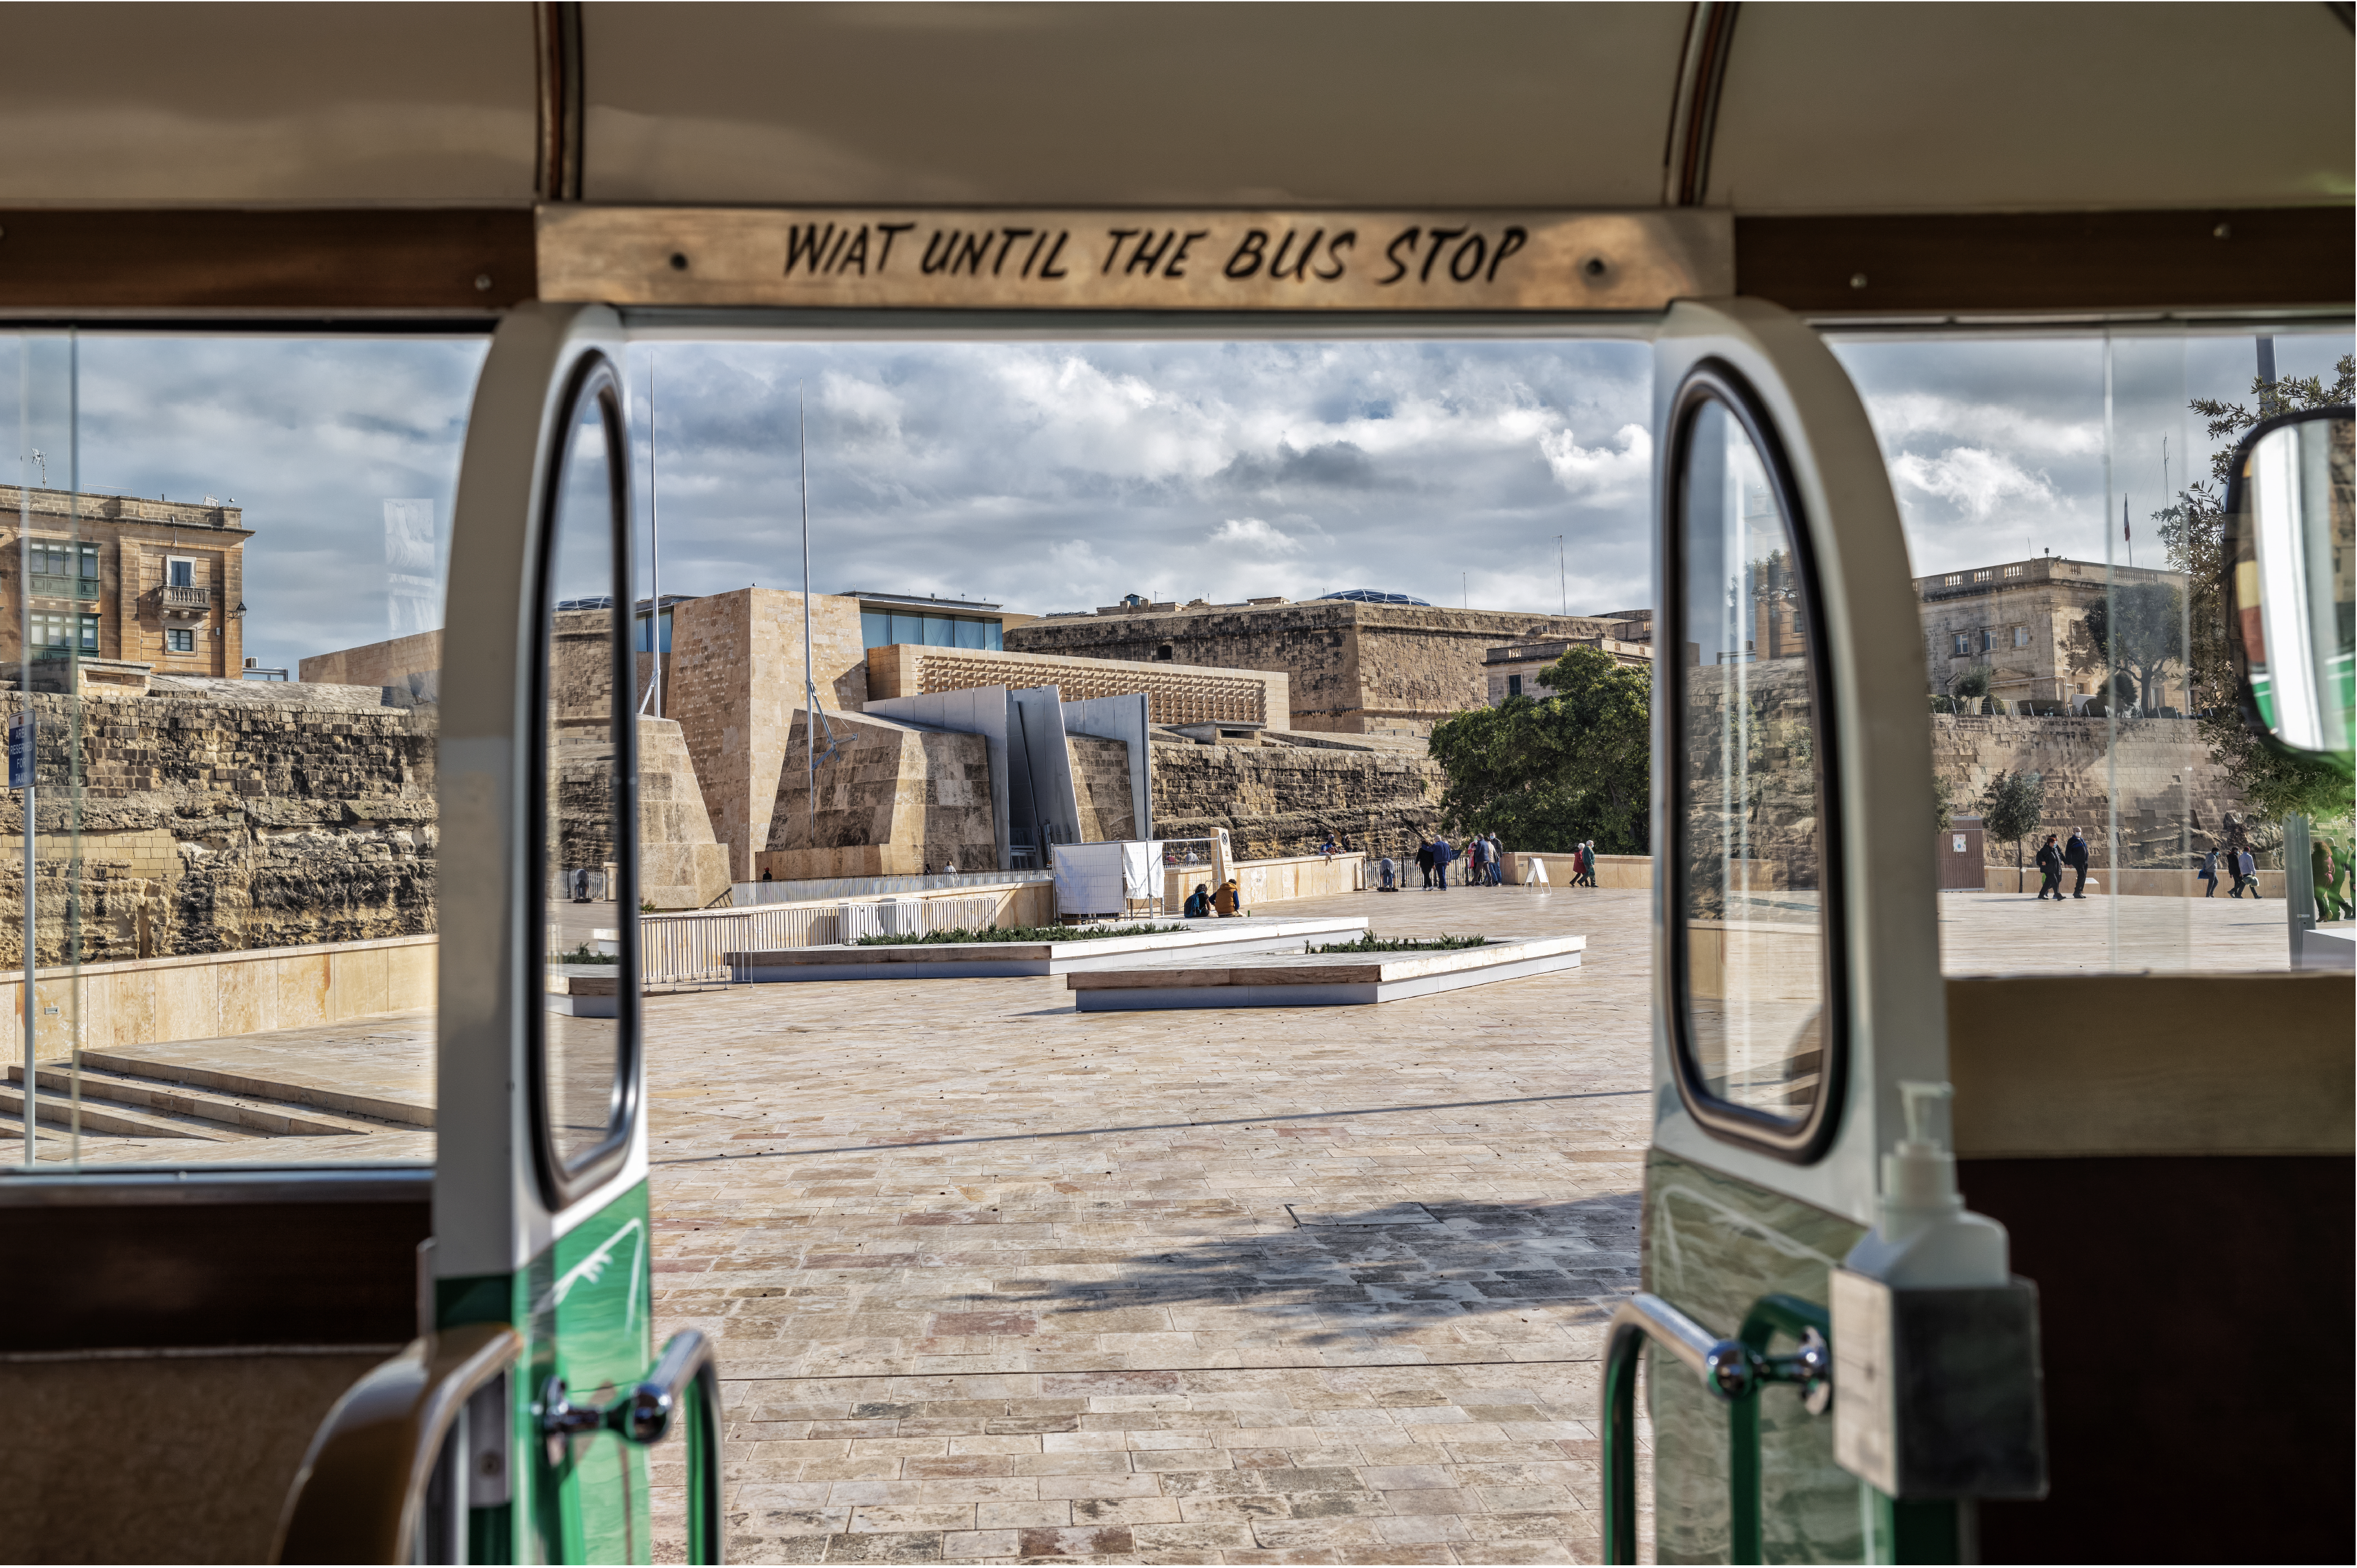 ‘The Bus Stop’, part of TNAX photo exhibition